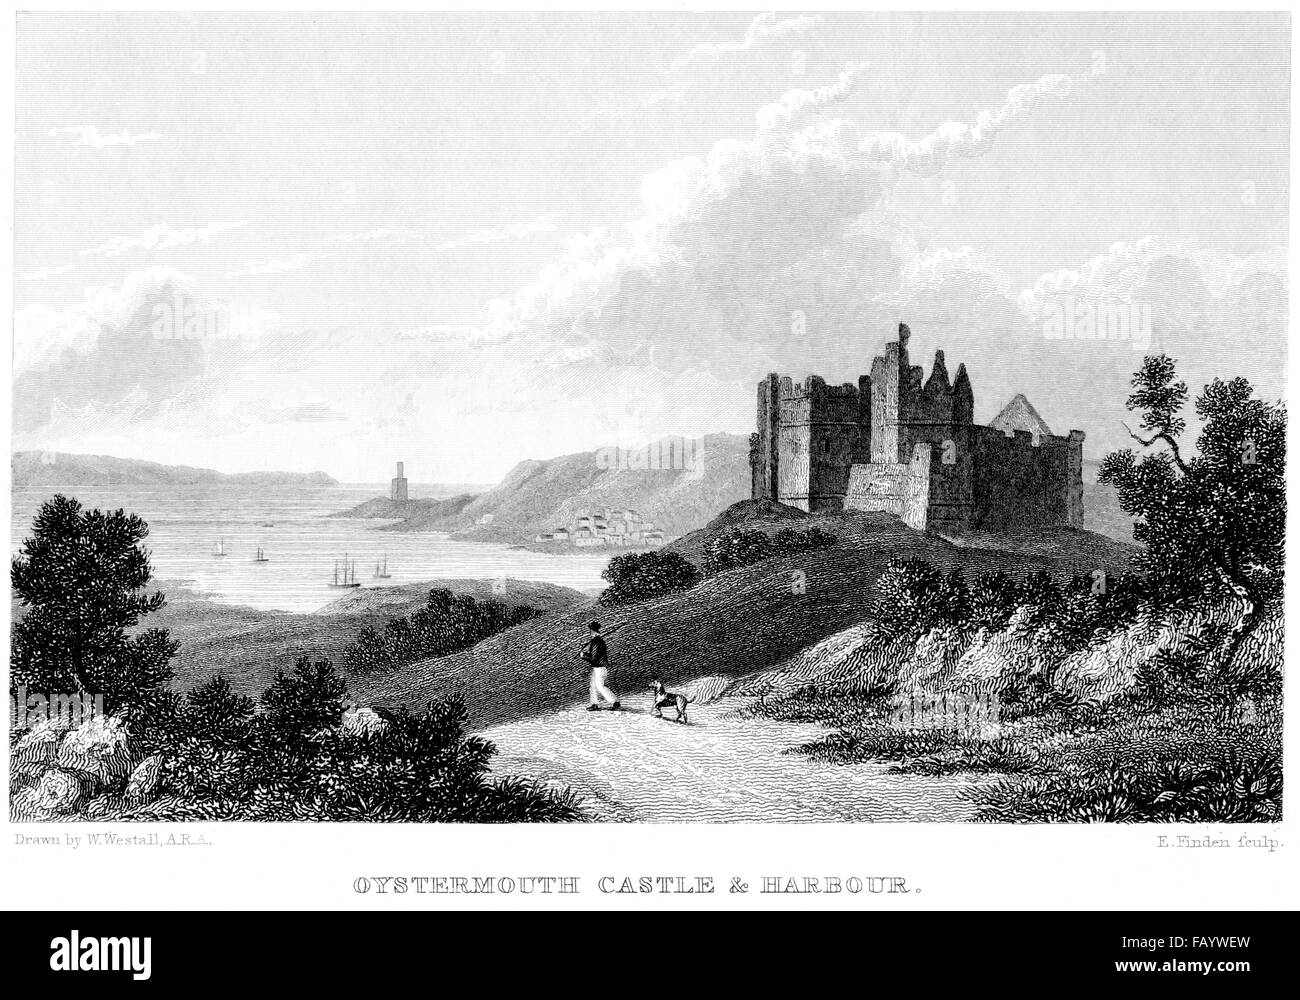 An engraving of Oystermouth Castle & Harbour scanned at high resolution from a book printed in 1834. Believed copyright free. Stock Photo